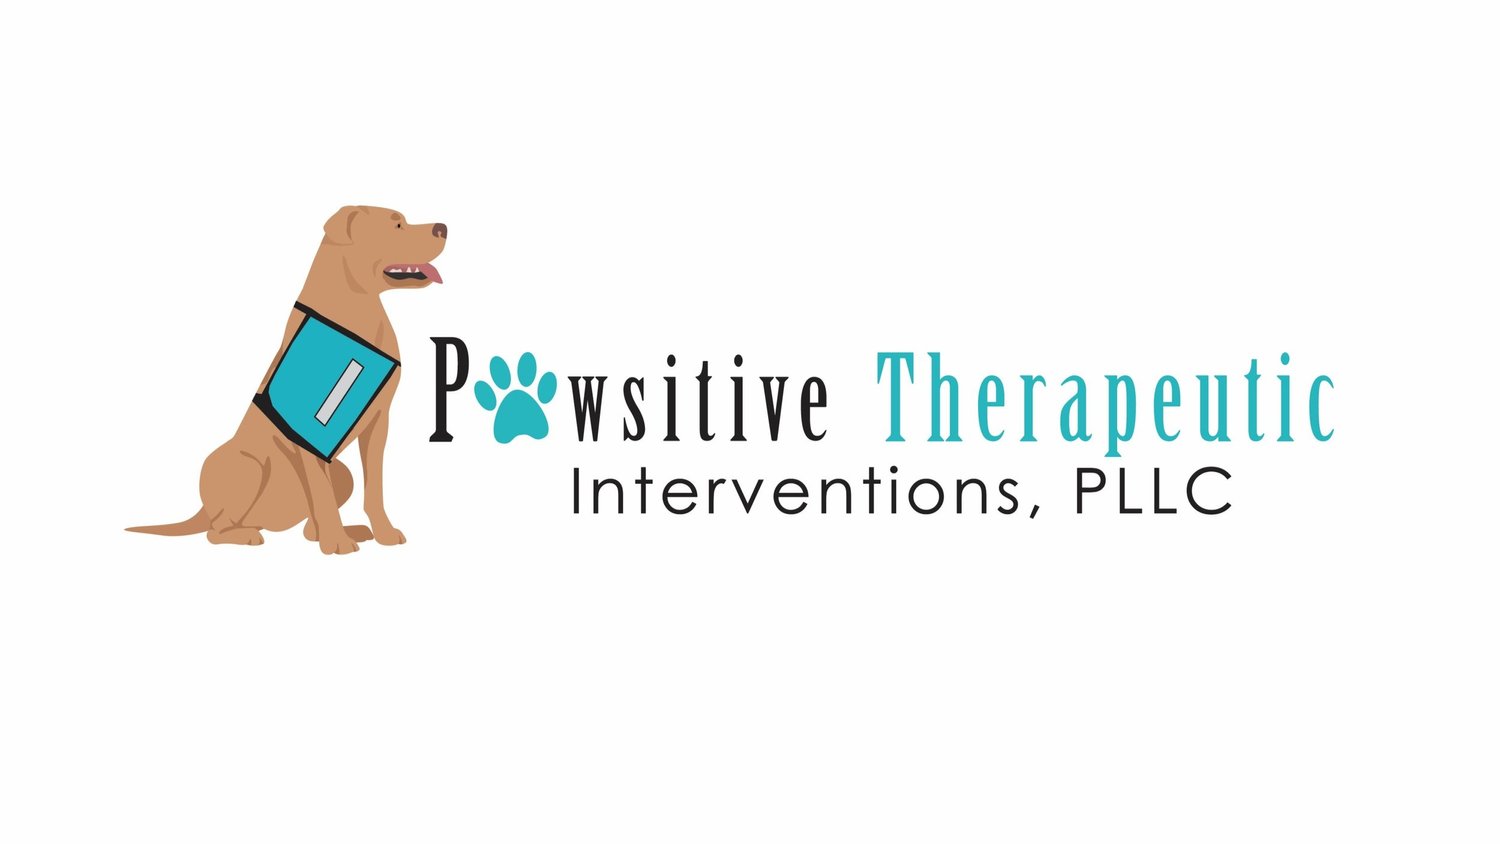 Pawsitive Therapeutic Interventions, PLLC